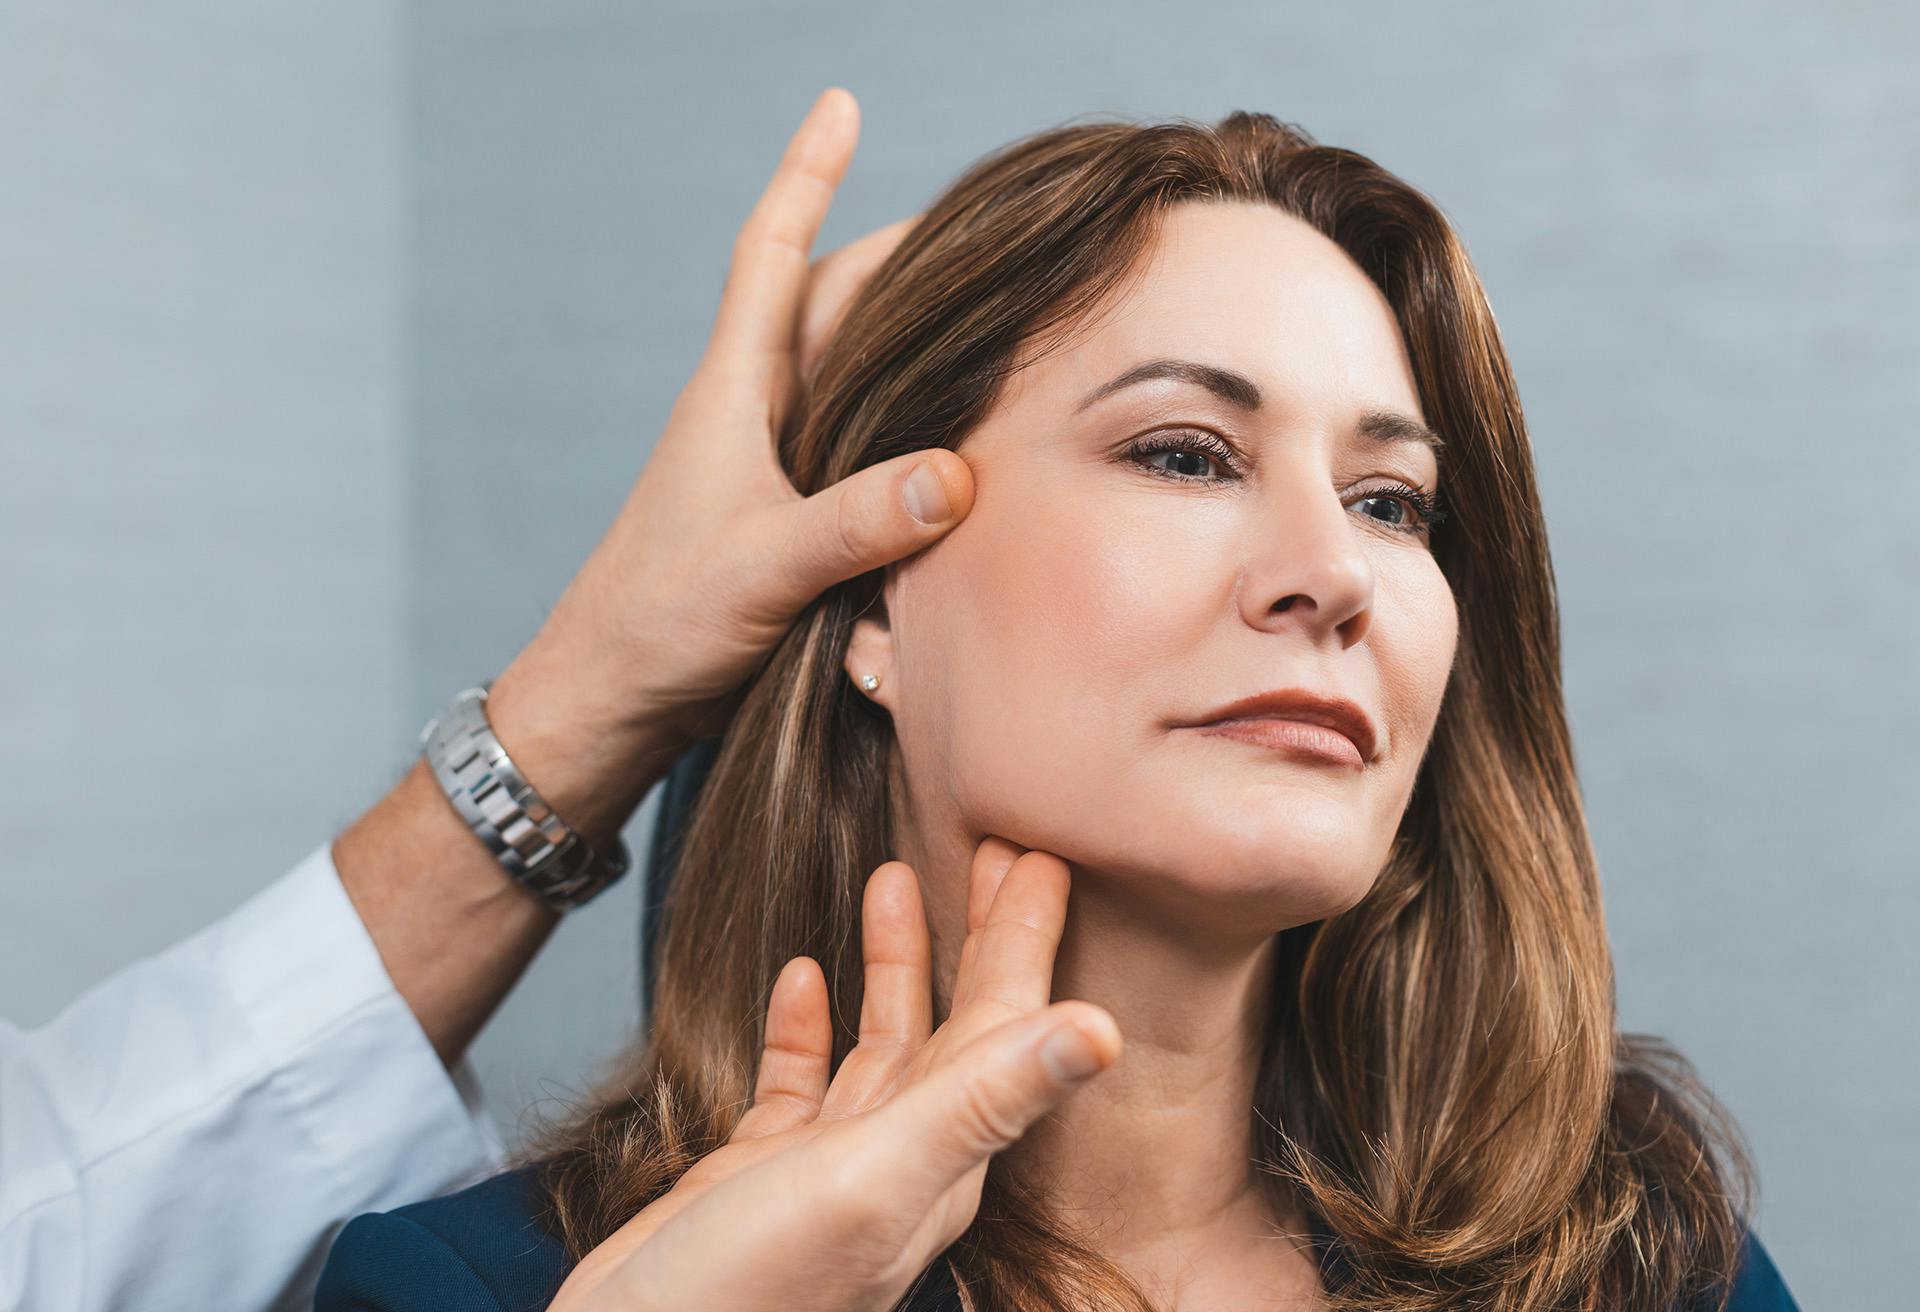 Woman getting examined with doctors hands on her chin and cheek